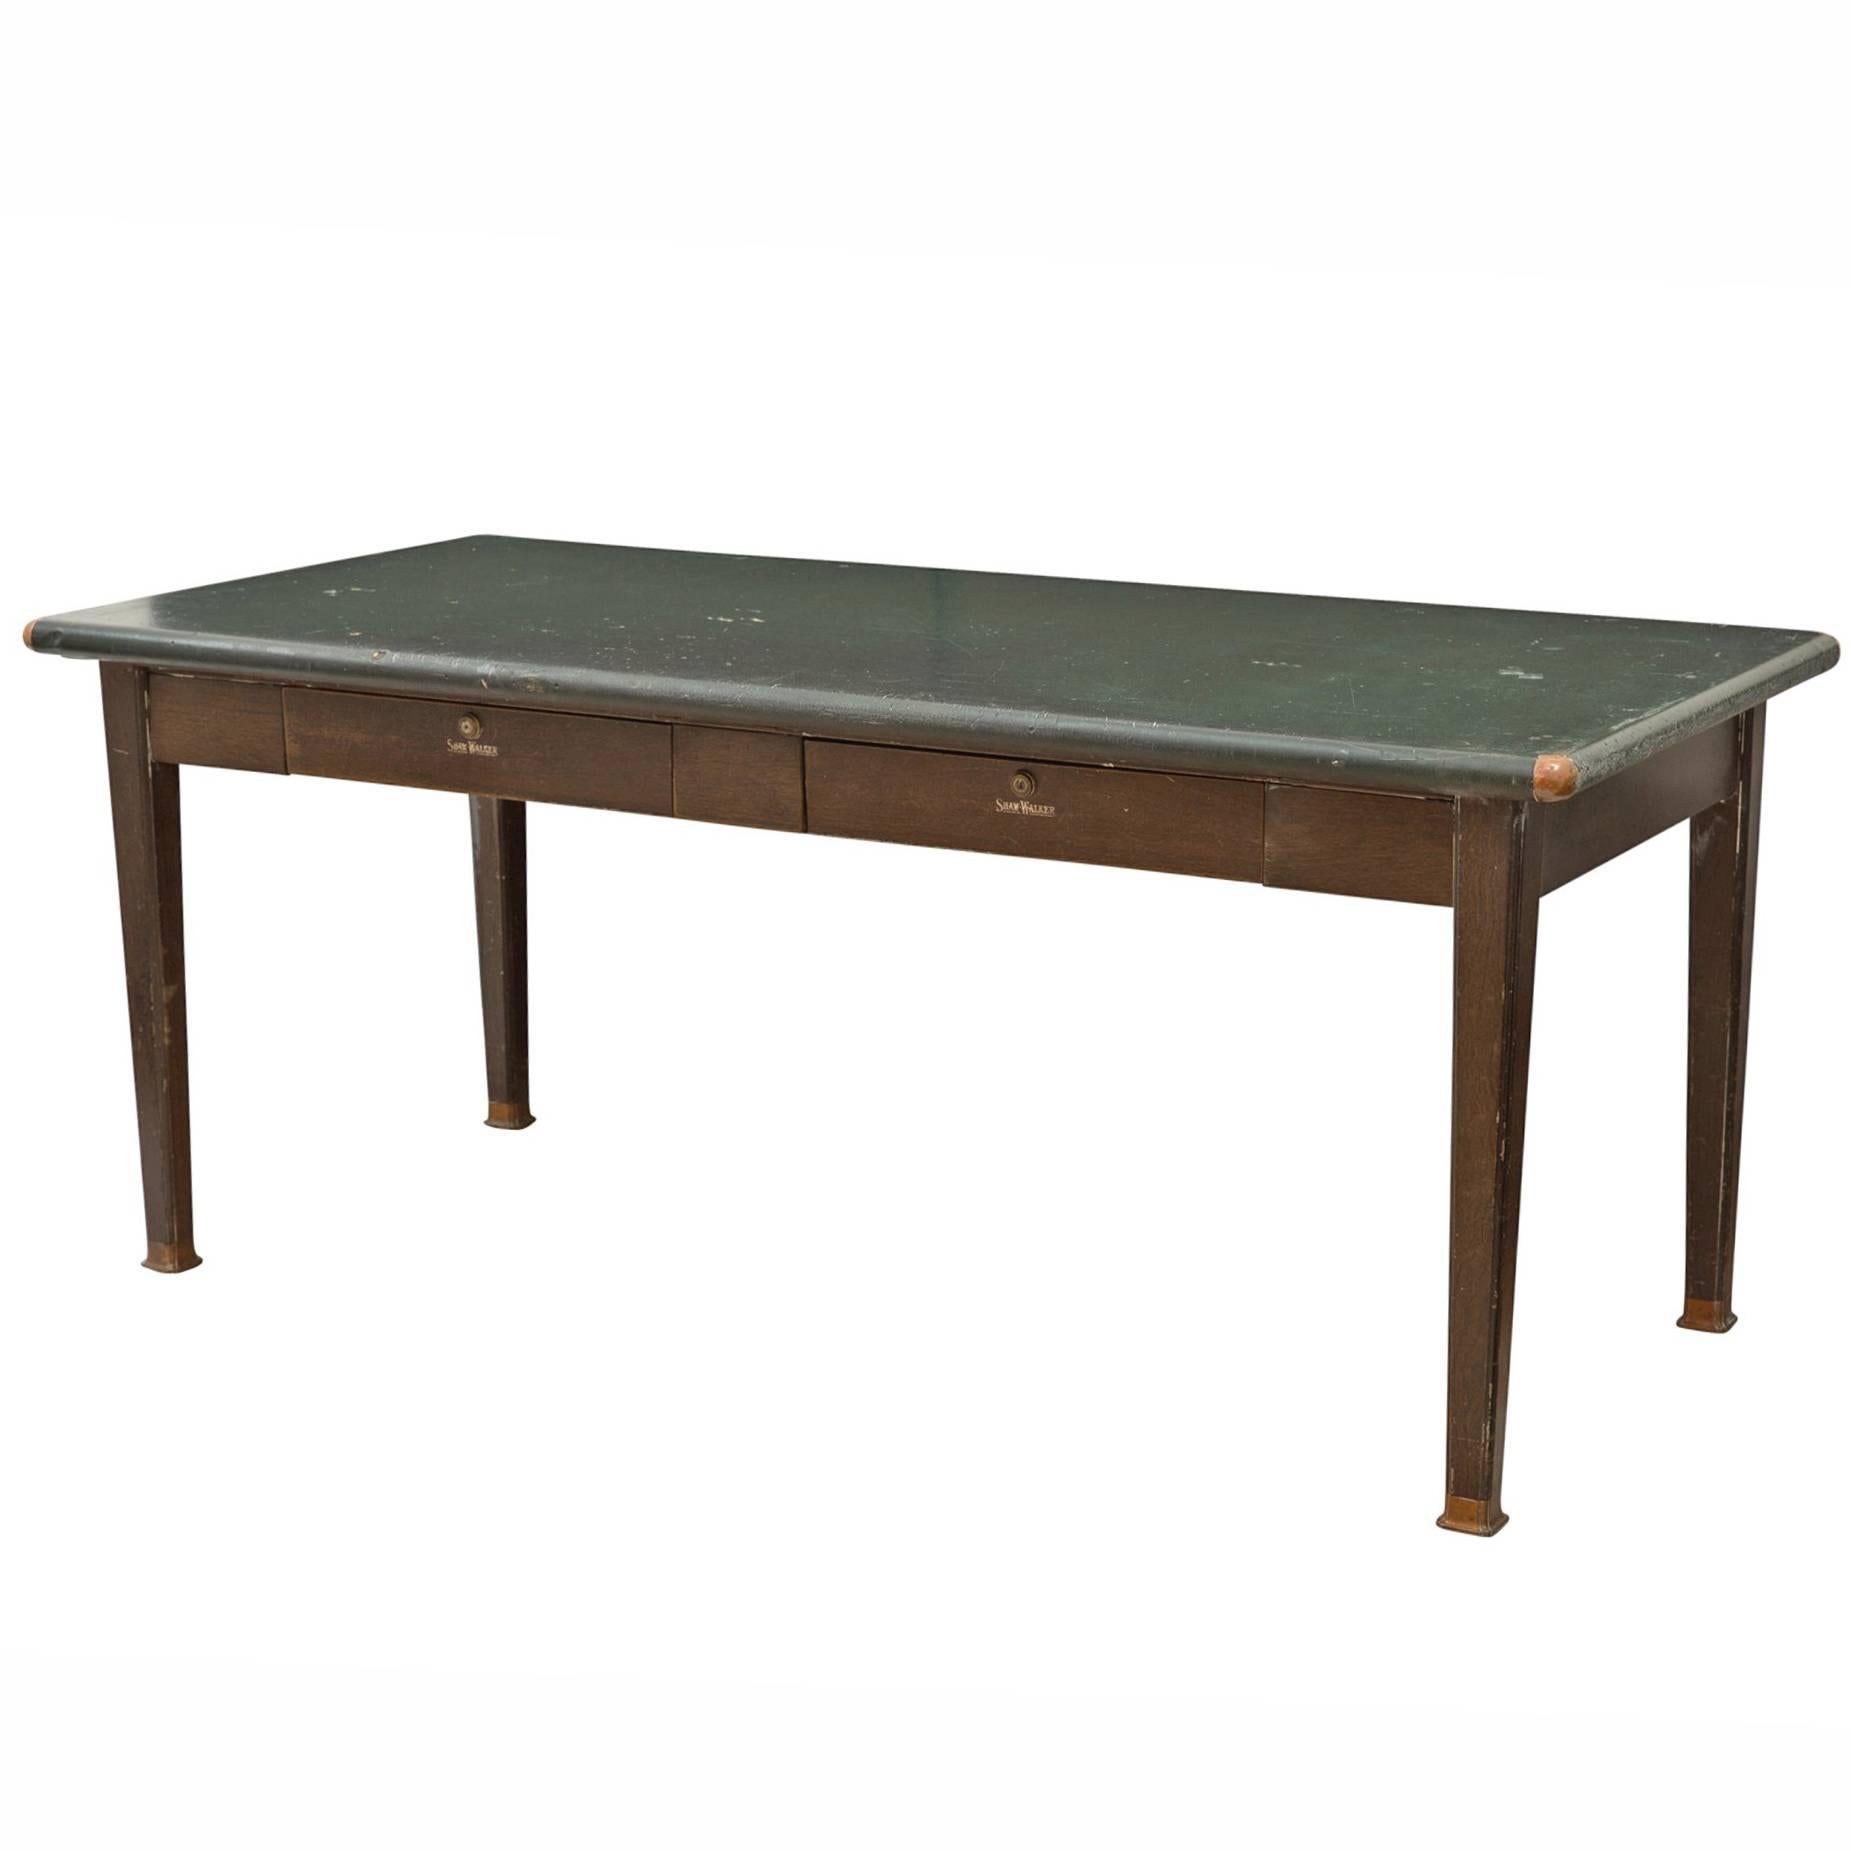 Steel Shaw Walker Table with Faux Wood Grain Base, circa 1950s For Sale